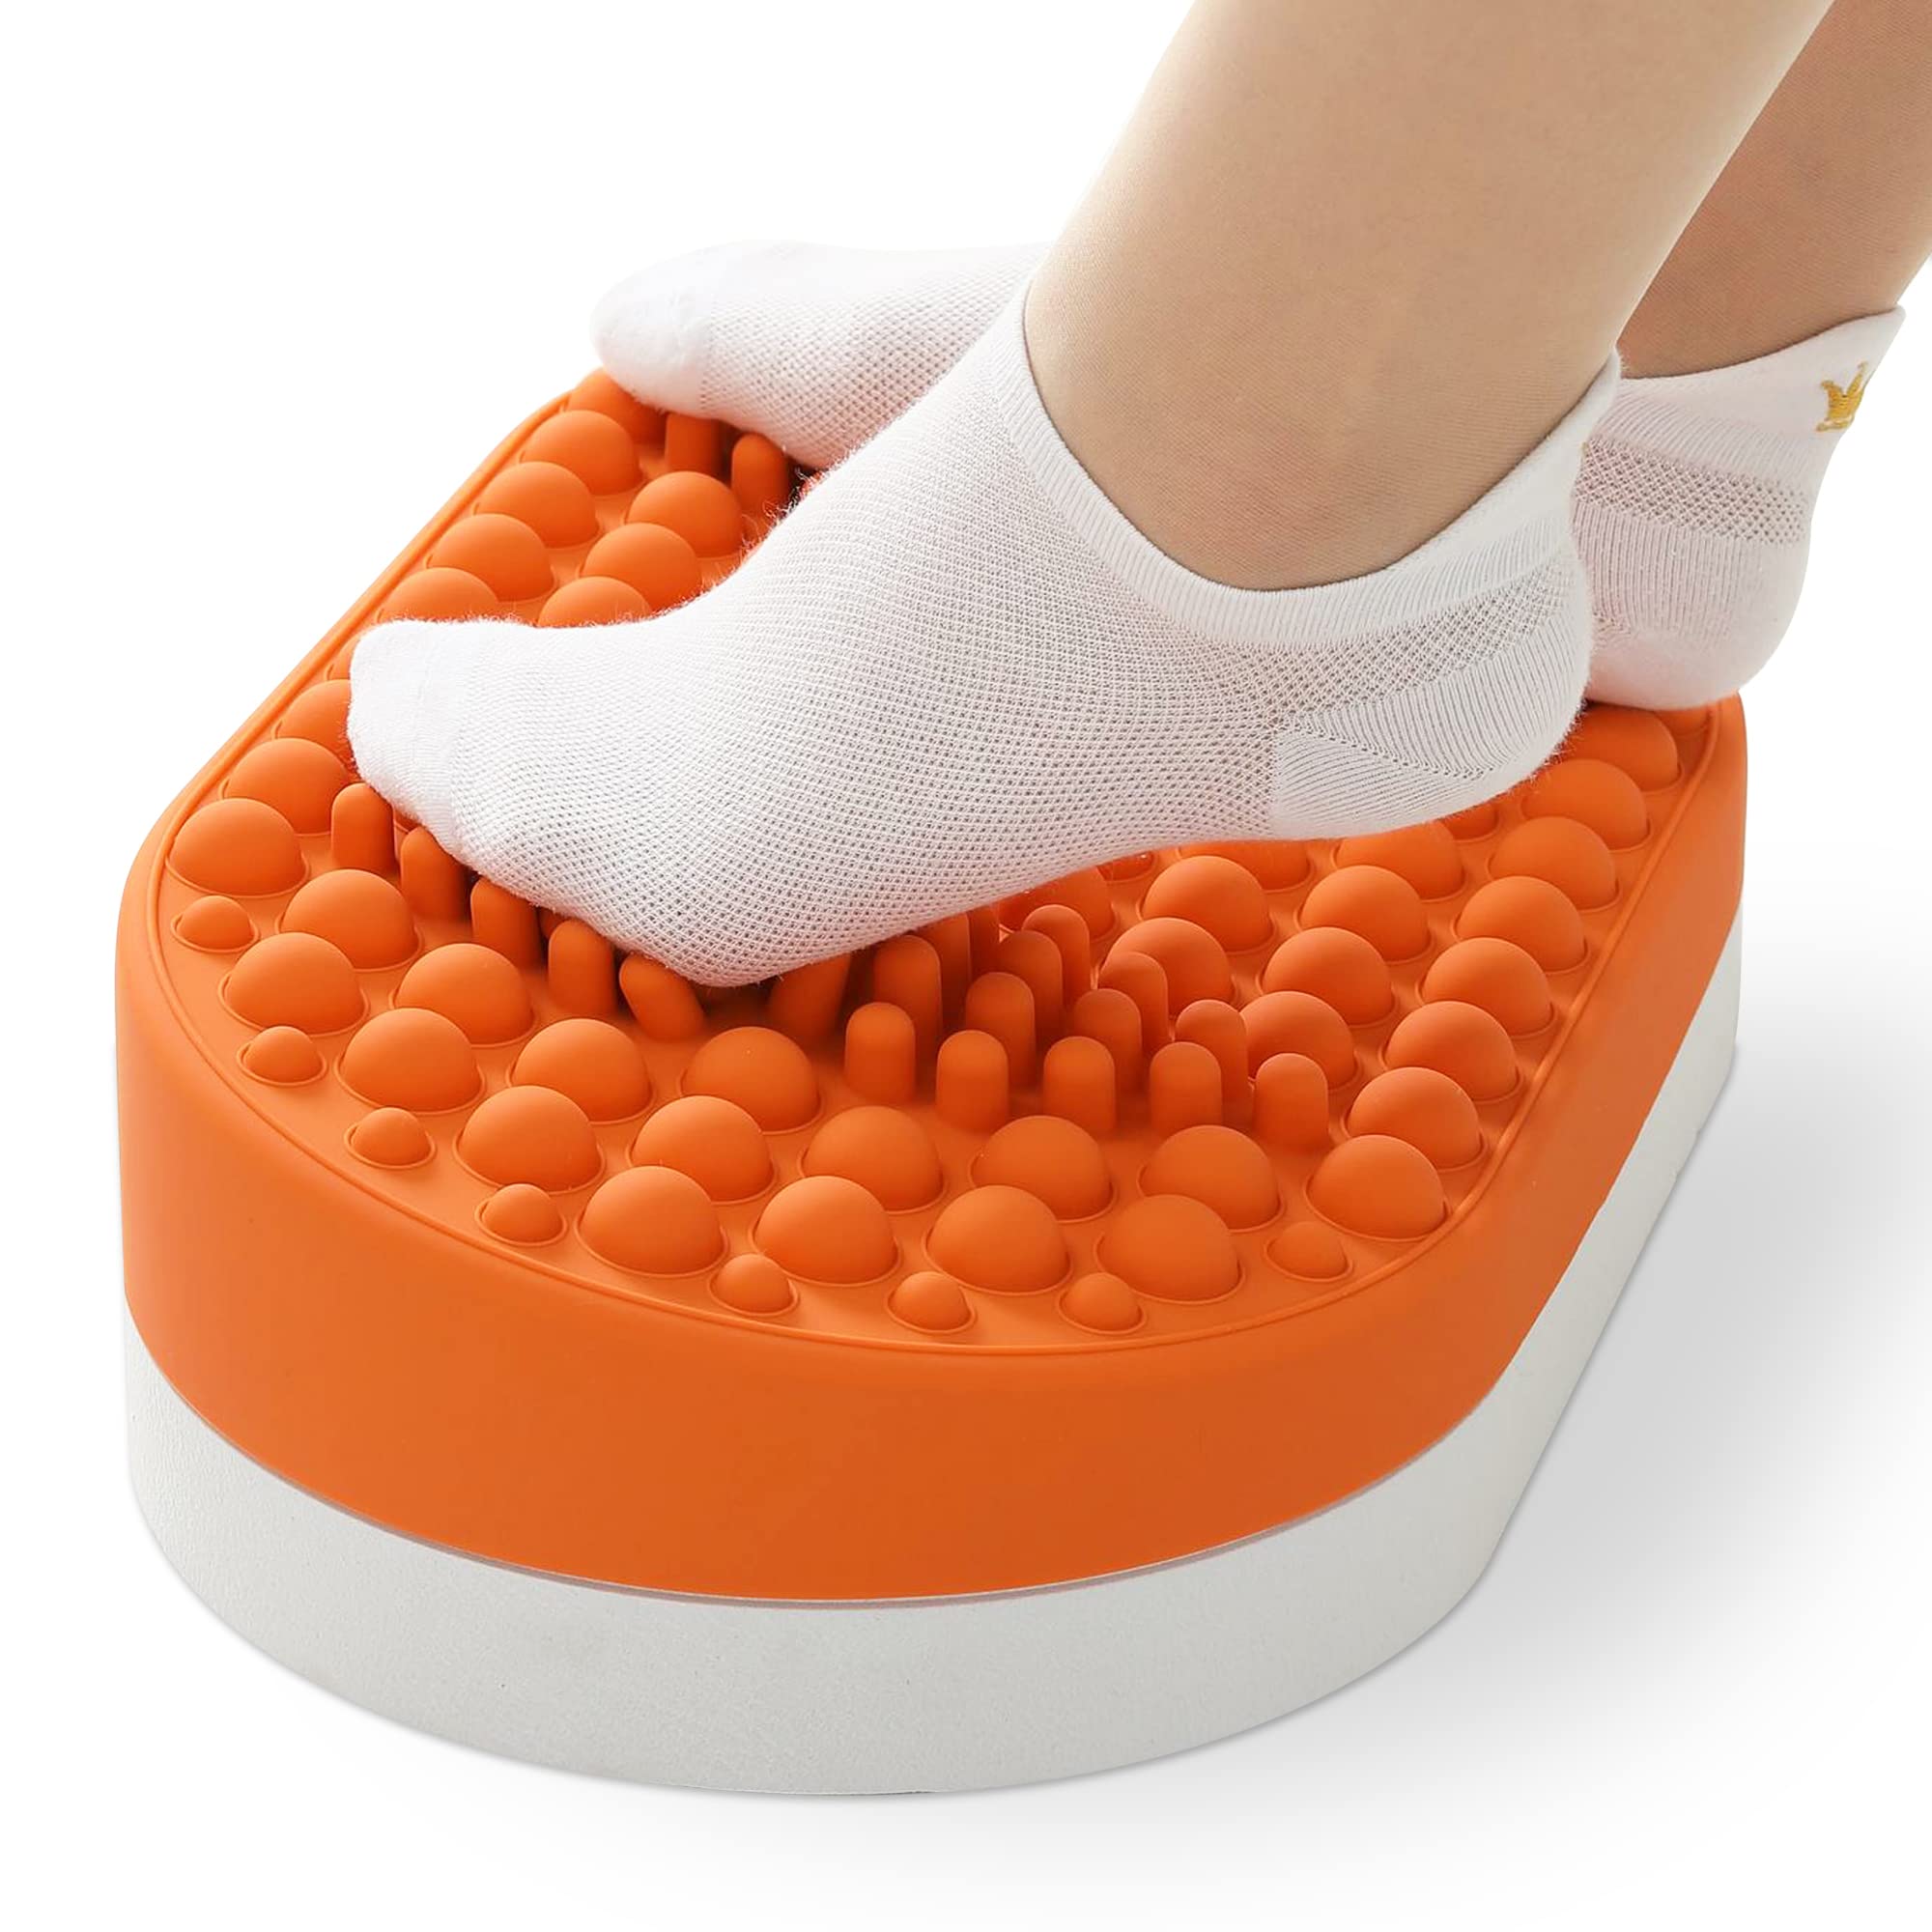 Dikdoc Foot Rest for Under Desk at Work, Home Office Foot Stool, Ottoman  Foot Massager for Plantar Fasciitis Relief, Soft Silicone Footrests,  Anti-Fatigue Fidget Toy (Orange)